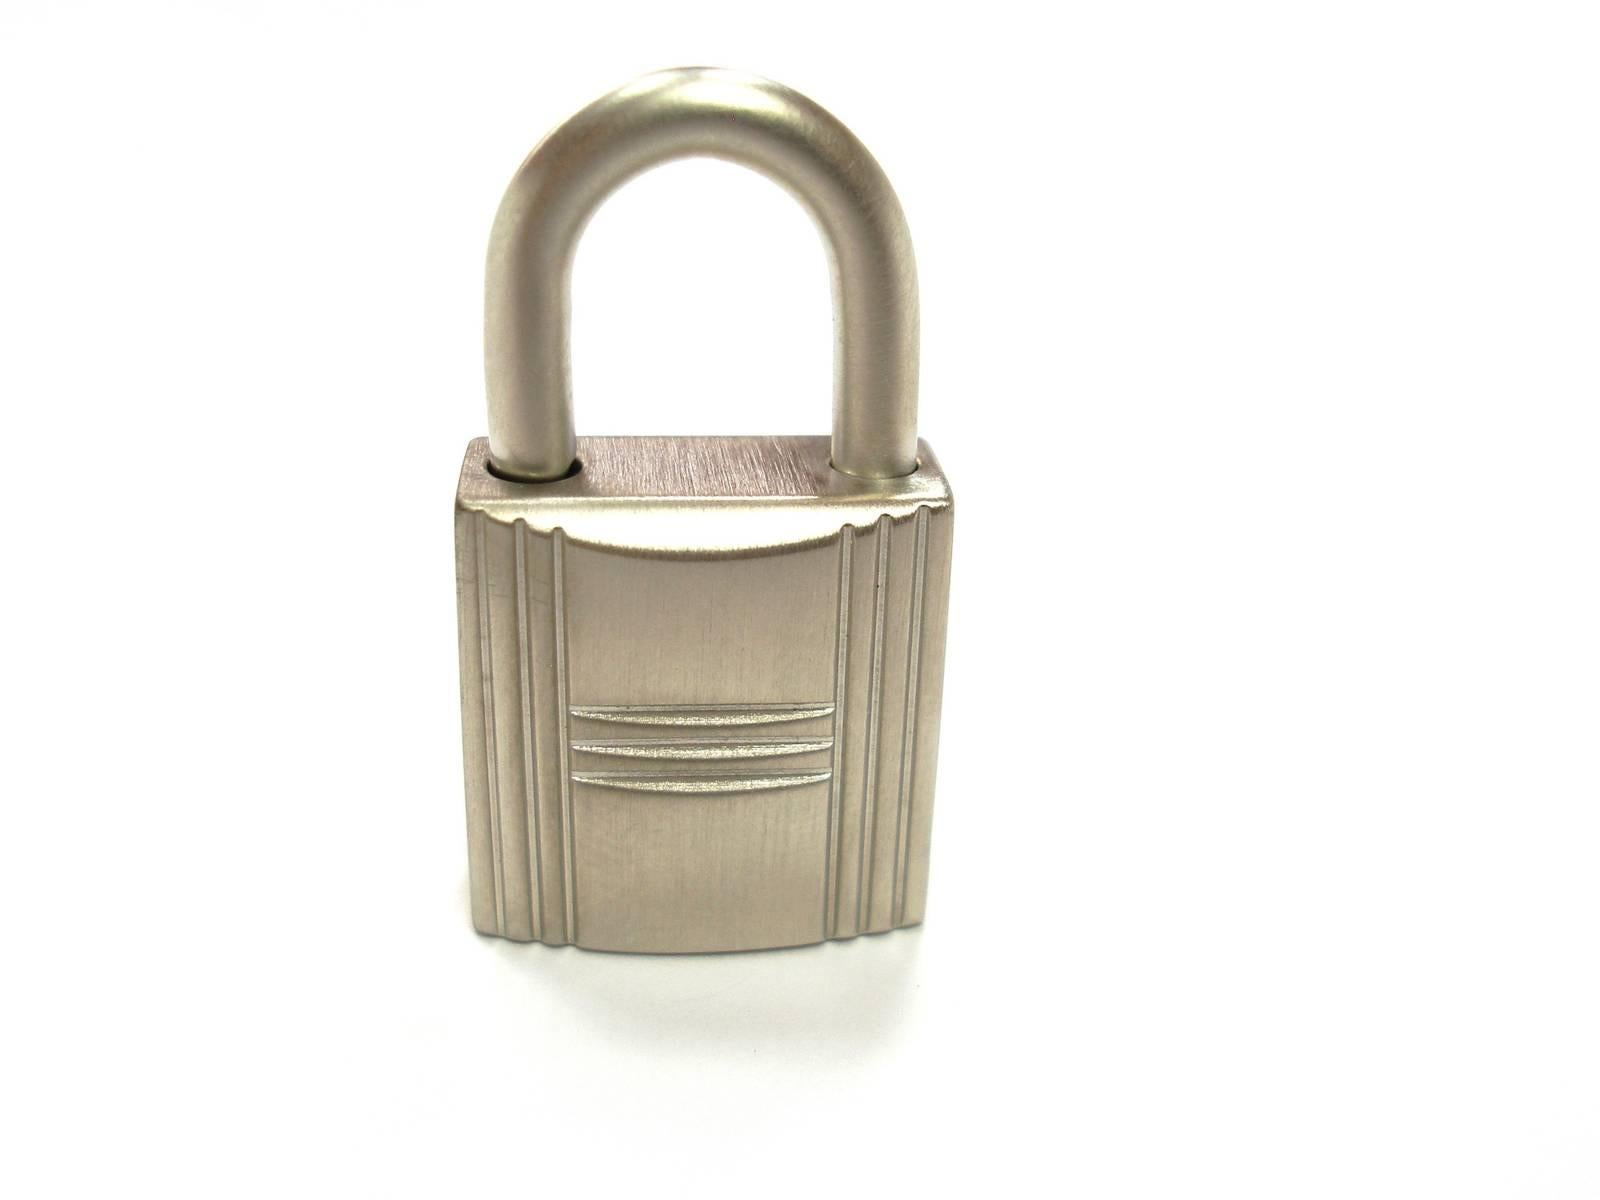 HERMES CADENAS LOCK & 2 KEYS FOR BIRKIN OR KELLY BOLIDE AND PICOTIN BAG 
BRUSH FINISH 
Numeroted N°100 
HAS BEEN TESTED
Its comes 2 KEYS 
Standard size : 2 cm x 3.5 cm ( with ring ) 
its comes with Hermès box for xmas
READY TO SHIP NOW
Thank you for